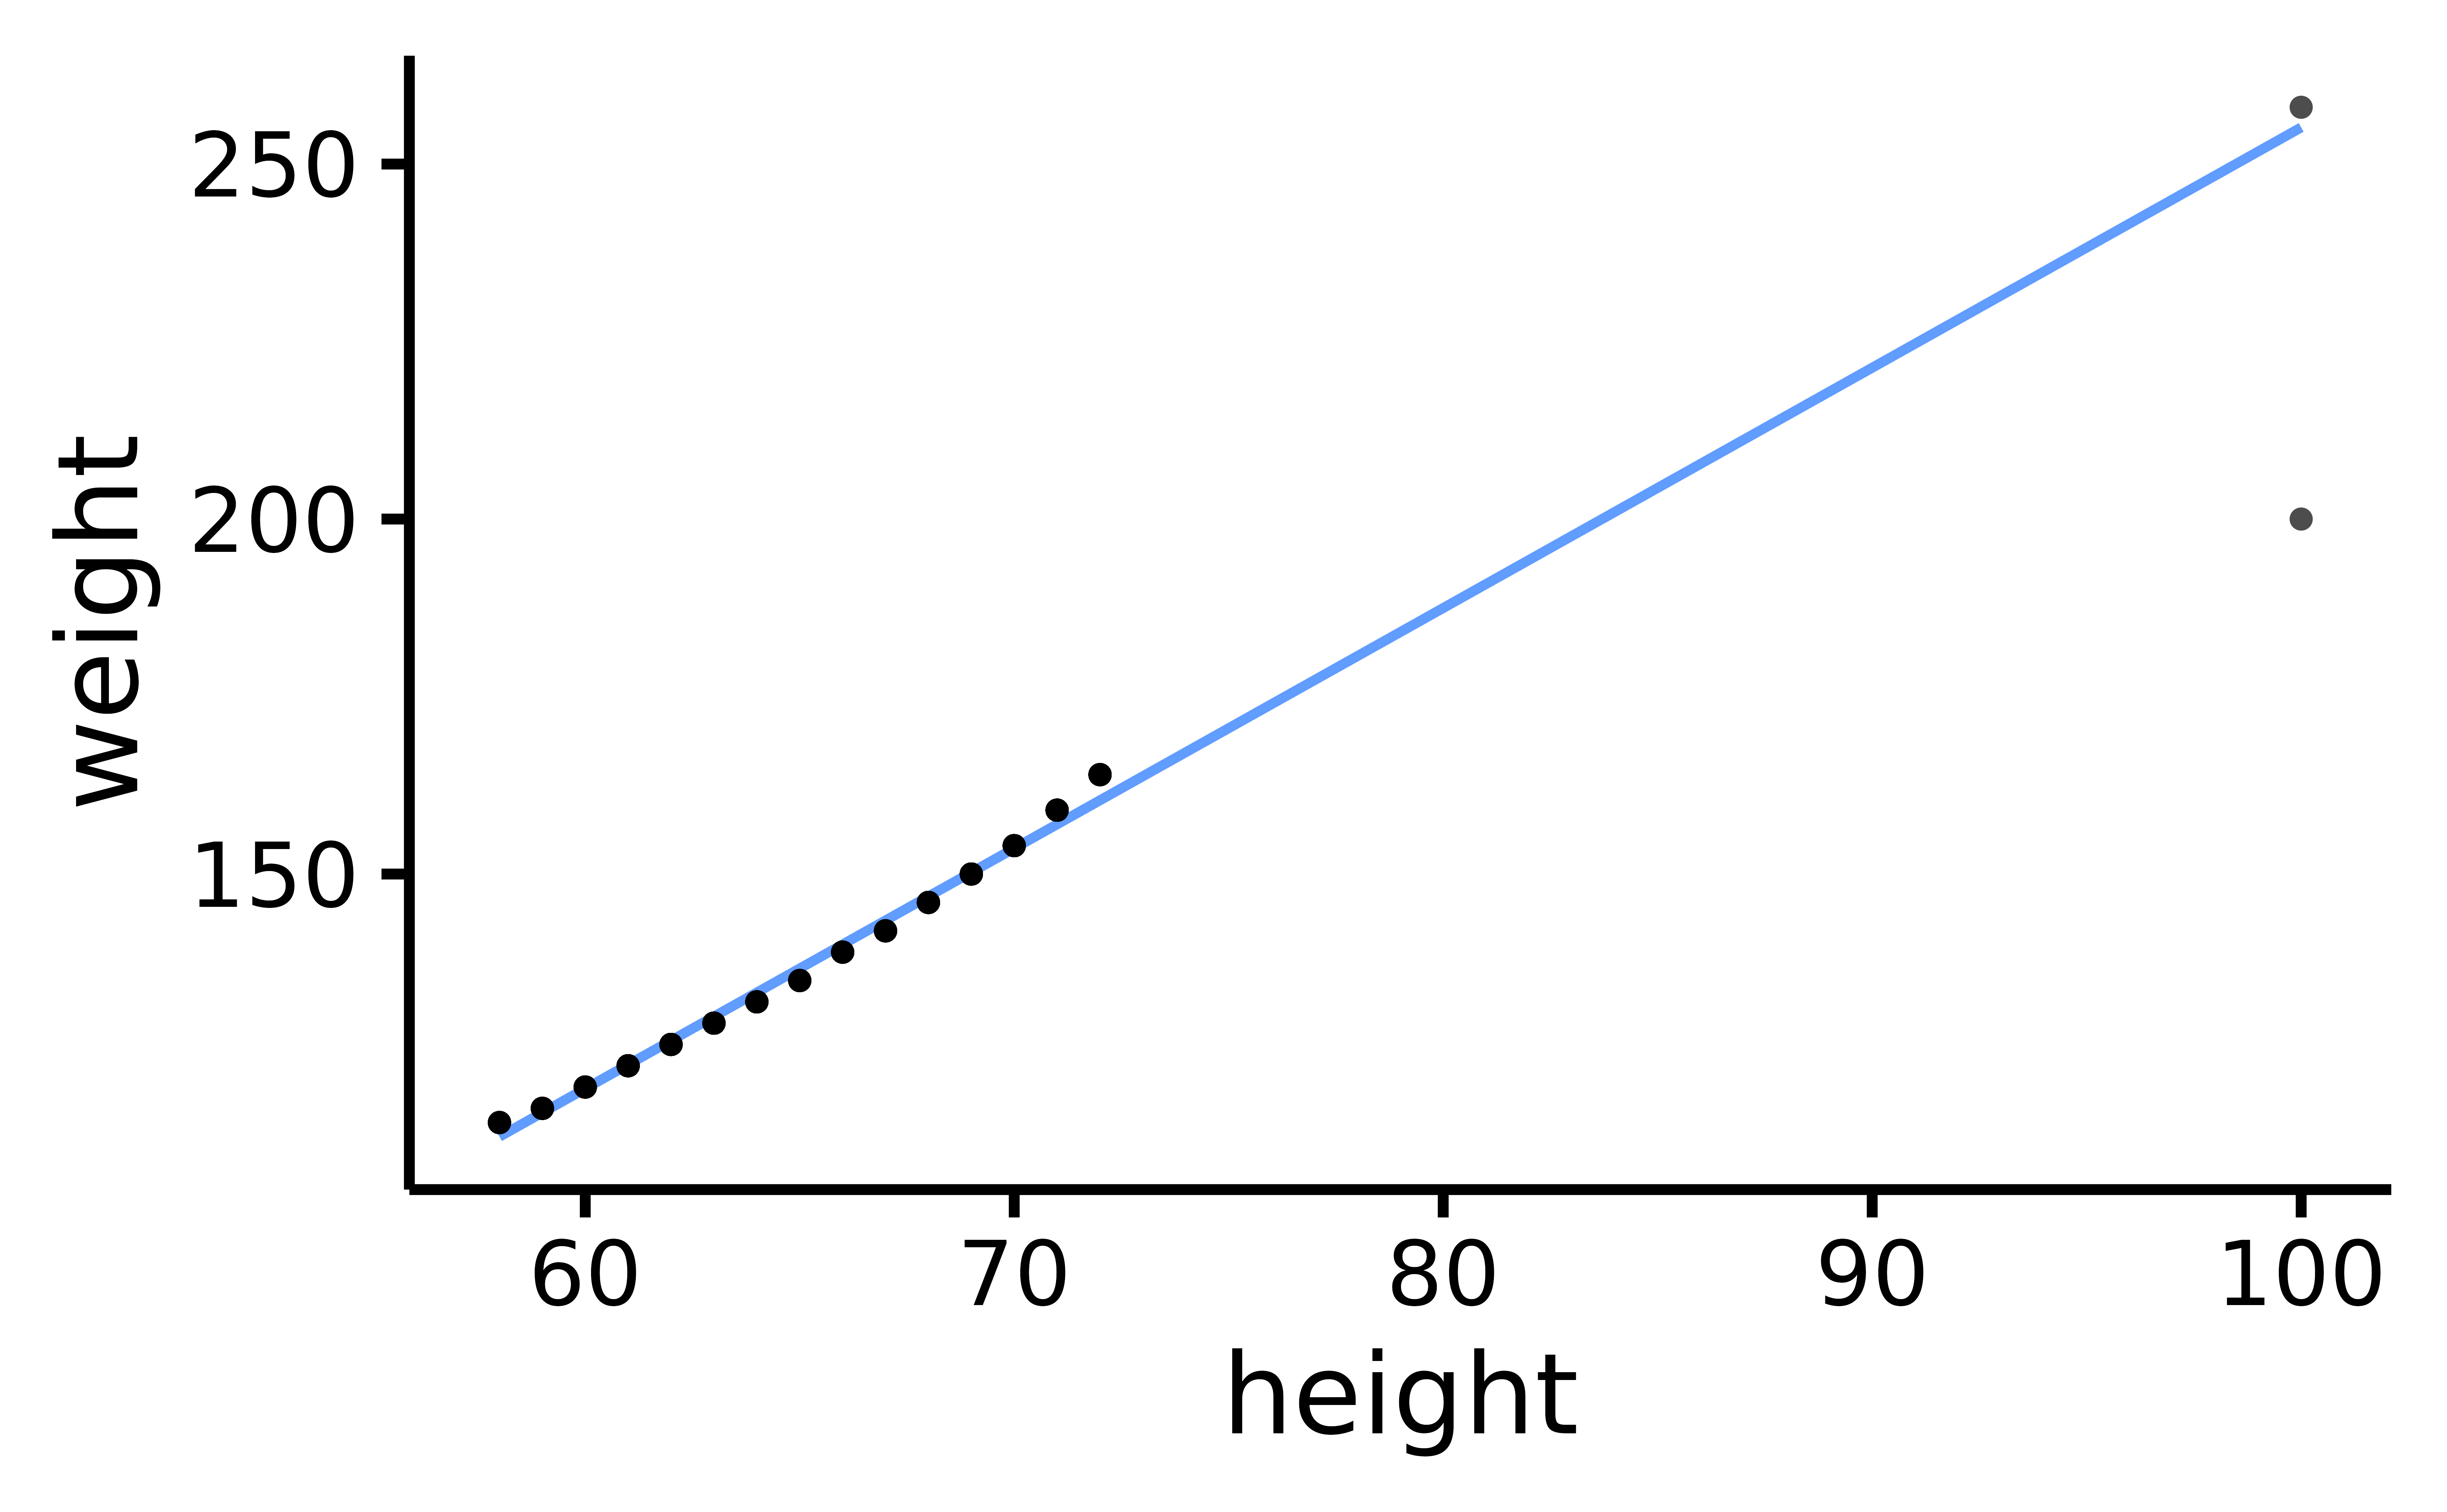 Scatter plot of height and weight, with two extreme observations: one model-consistent (top-right) and the other, model-inconsistent (i.e., an outlier; bottom-right).